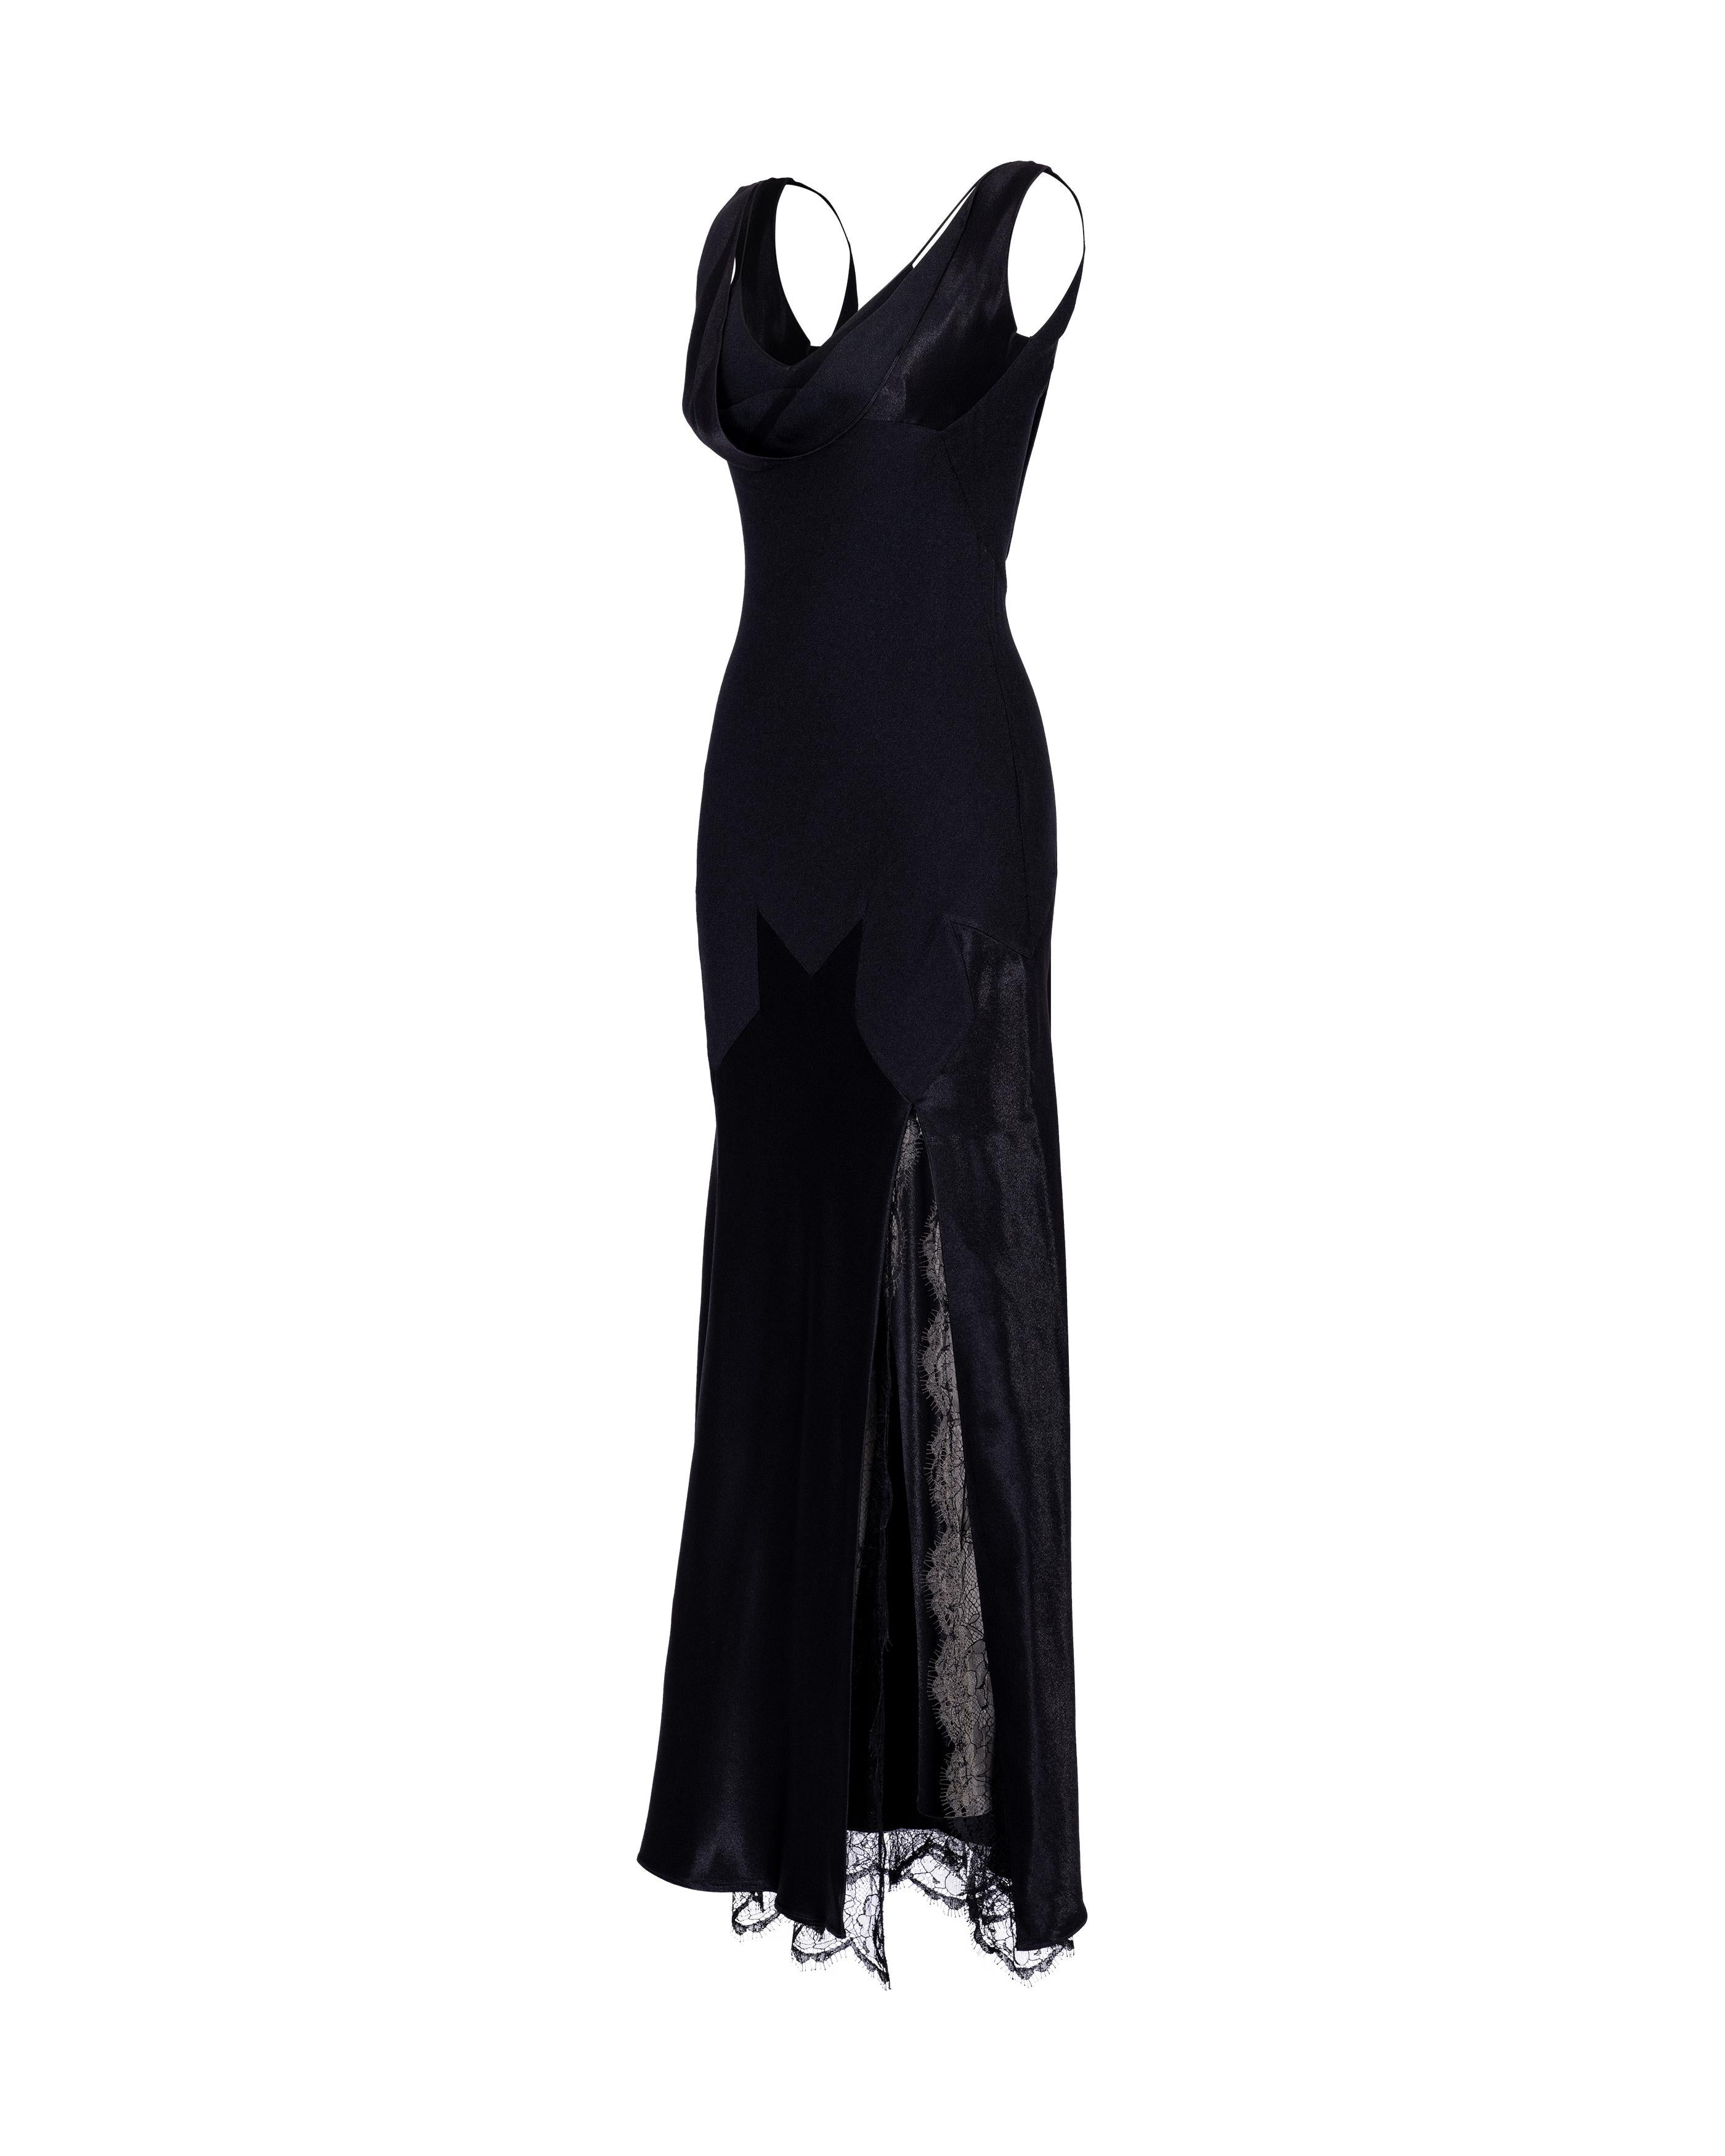 S/S 1995 John Galliano Black Bias Cut Gown with Lace Front Slit In Excellent Condition In North Hollywood, CA